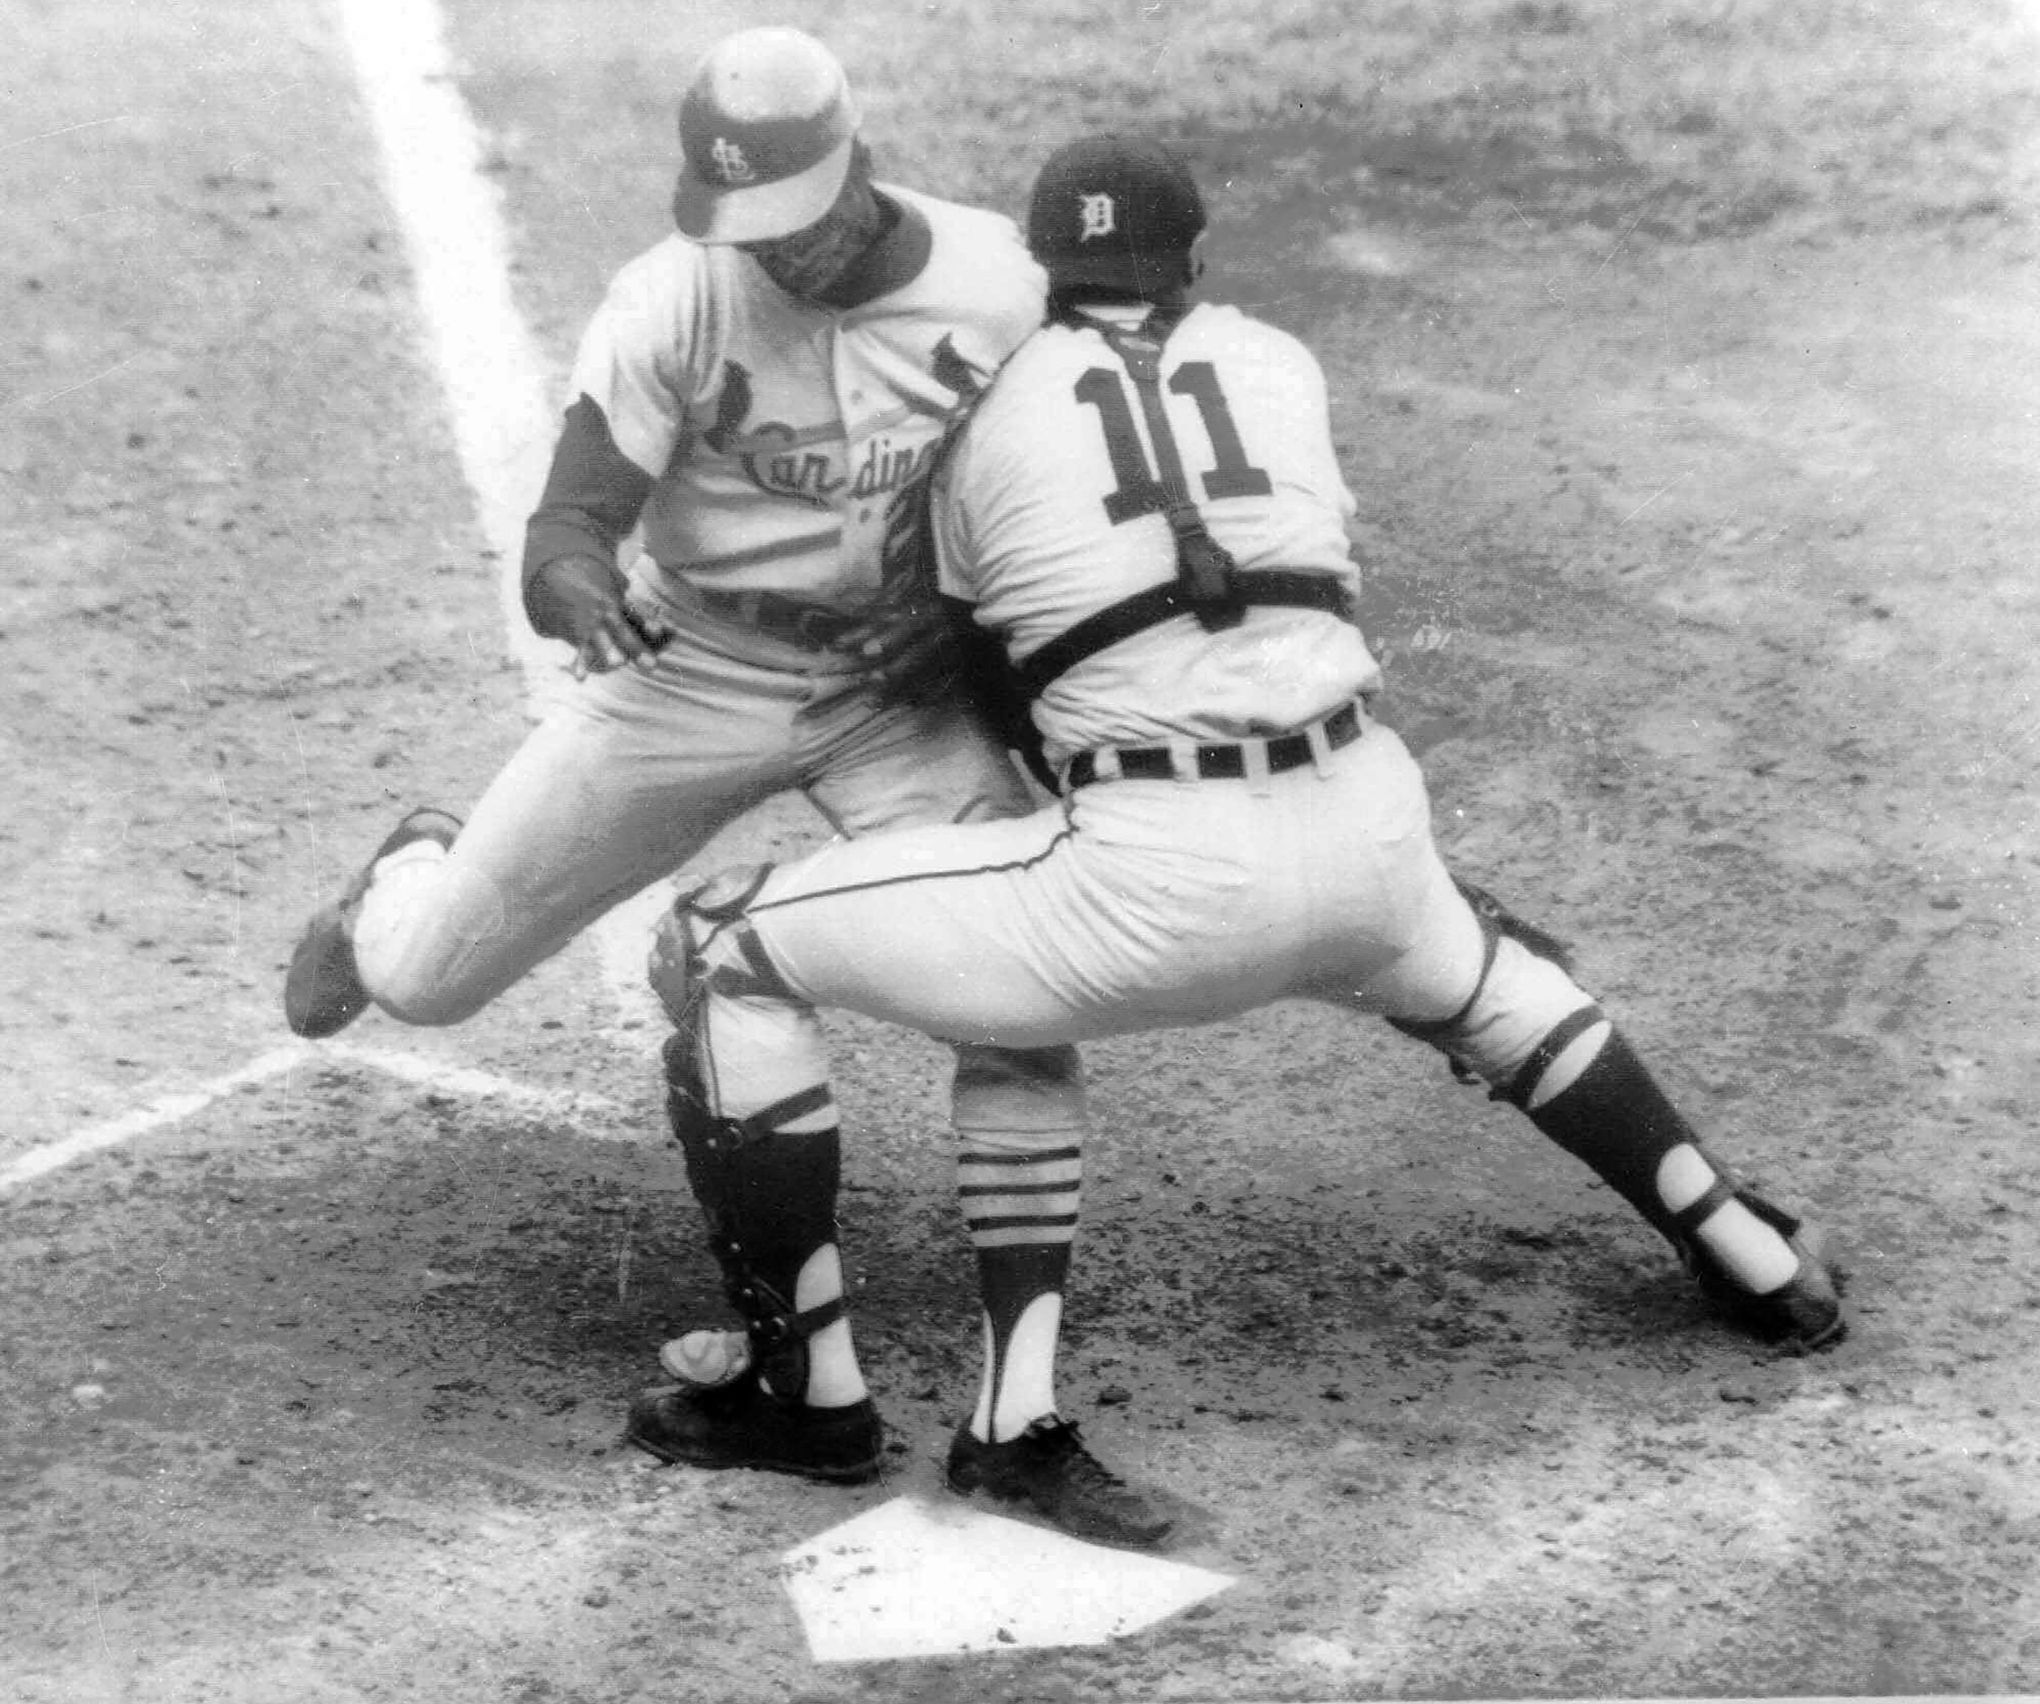 Bill Freehan, catcher for 1968 World Series champion Detroit Tigers, dies  at 79 - The Washington Post